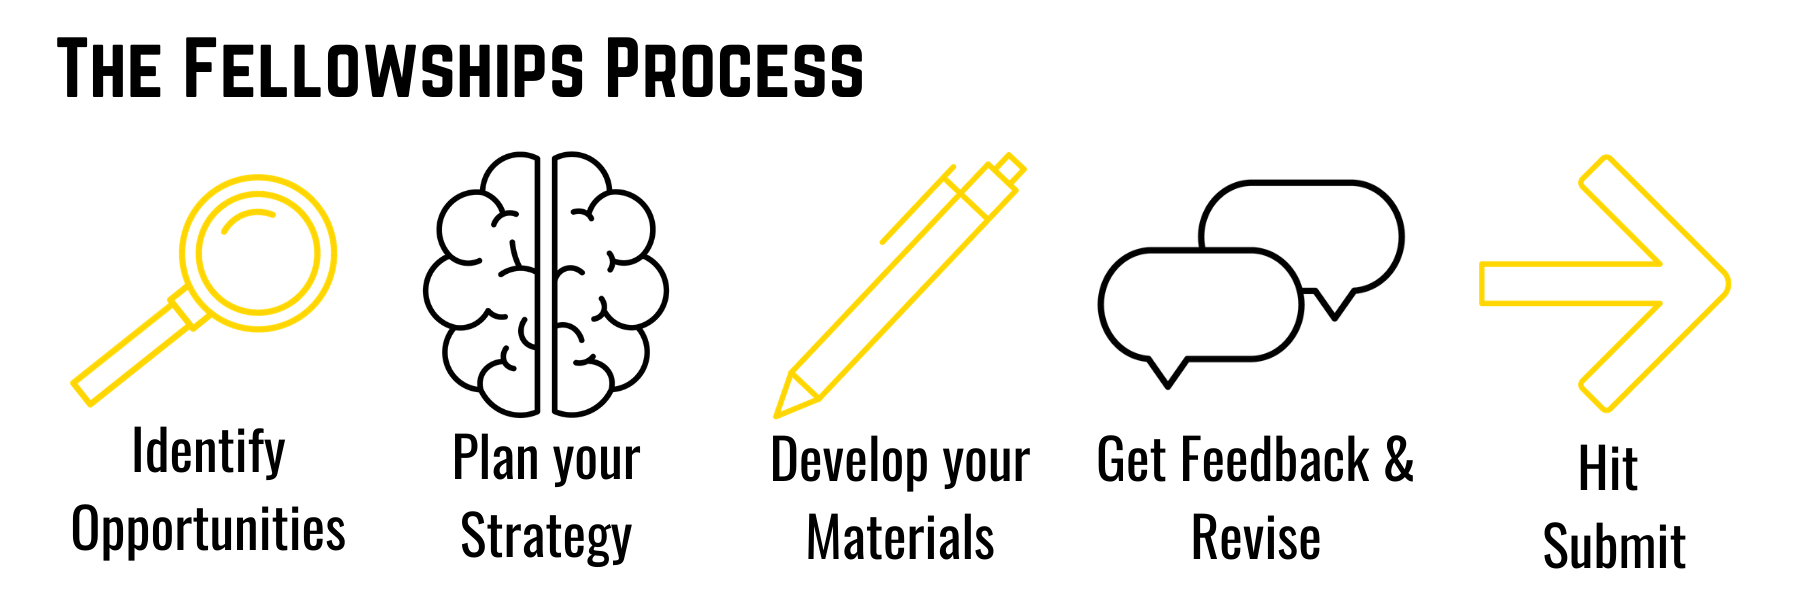 Fellowships process graphic